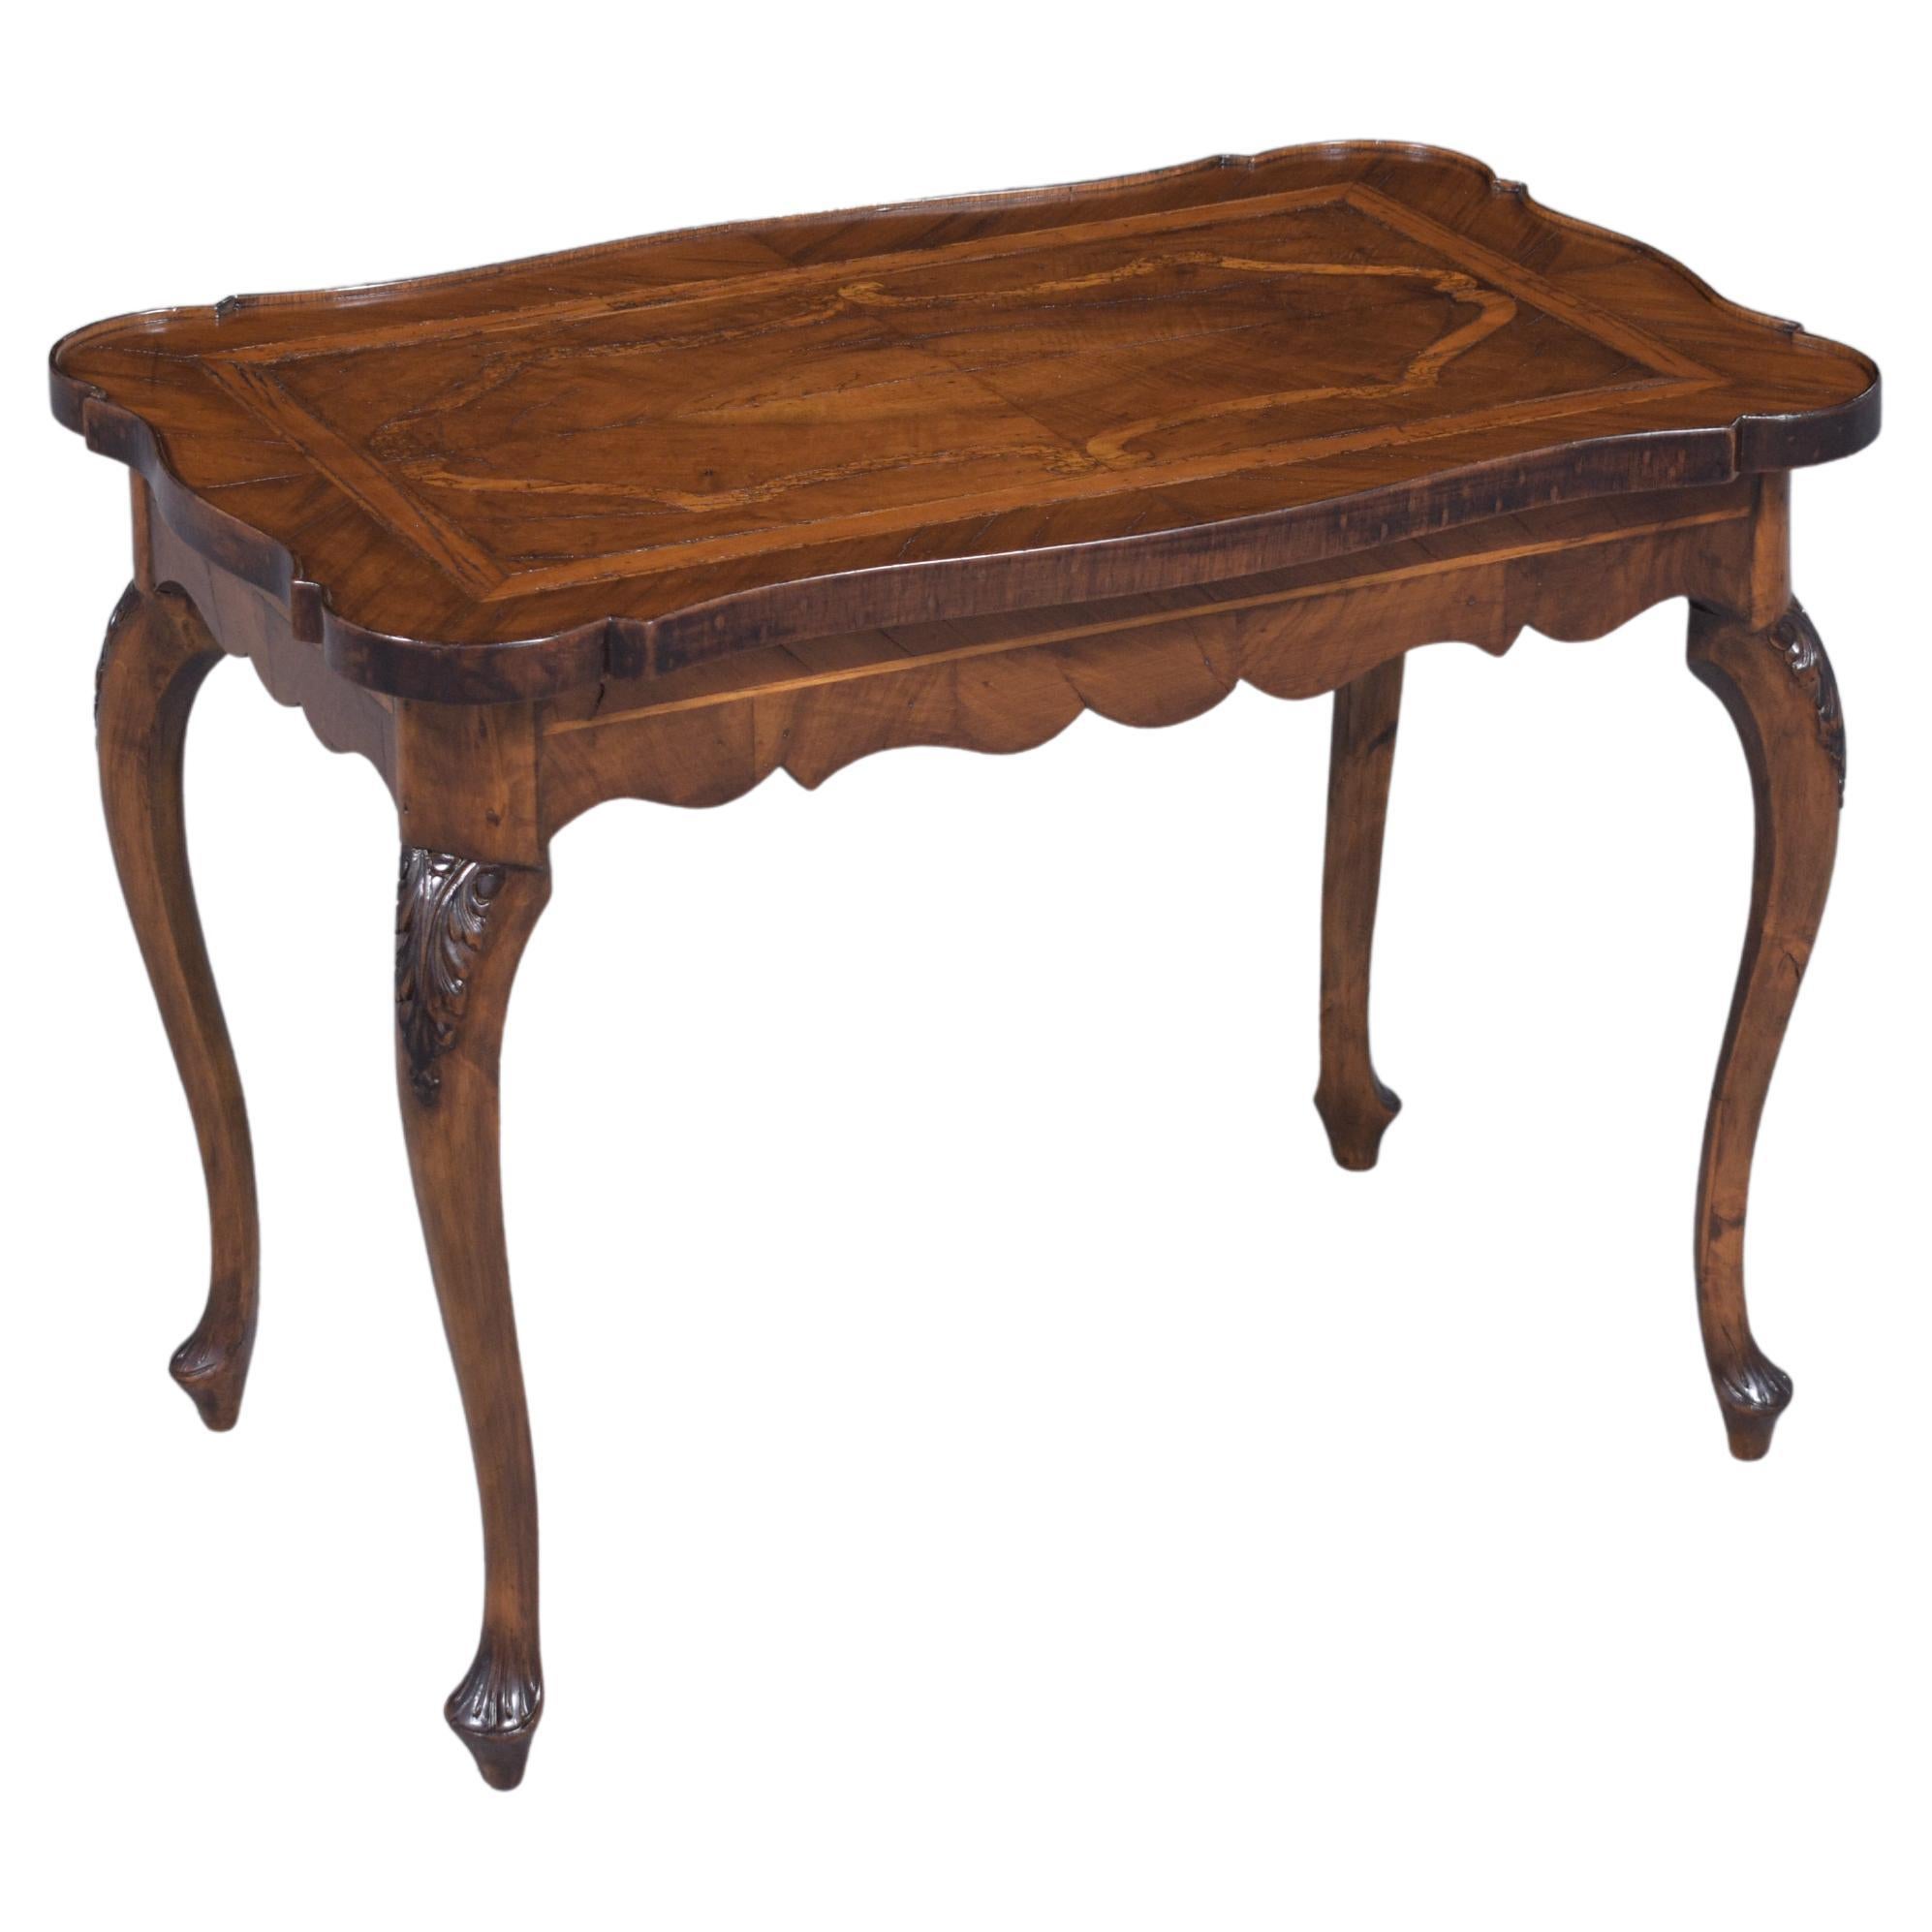 Late 19th-Century English Walnut Side Table: Antique Elegance Restored For Sale